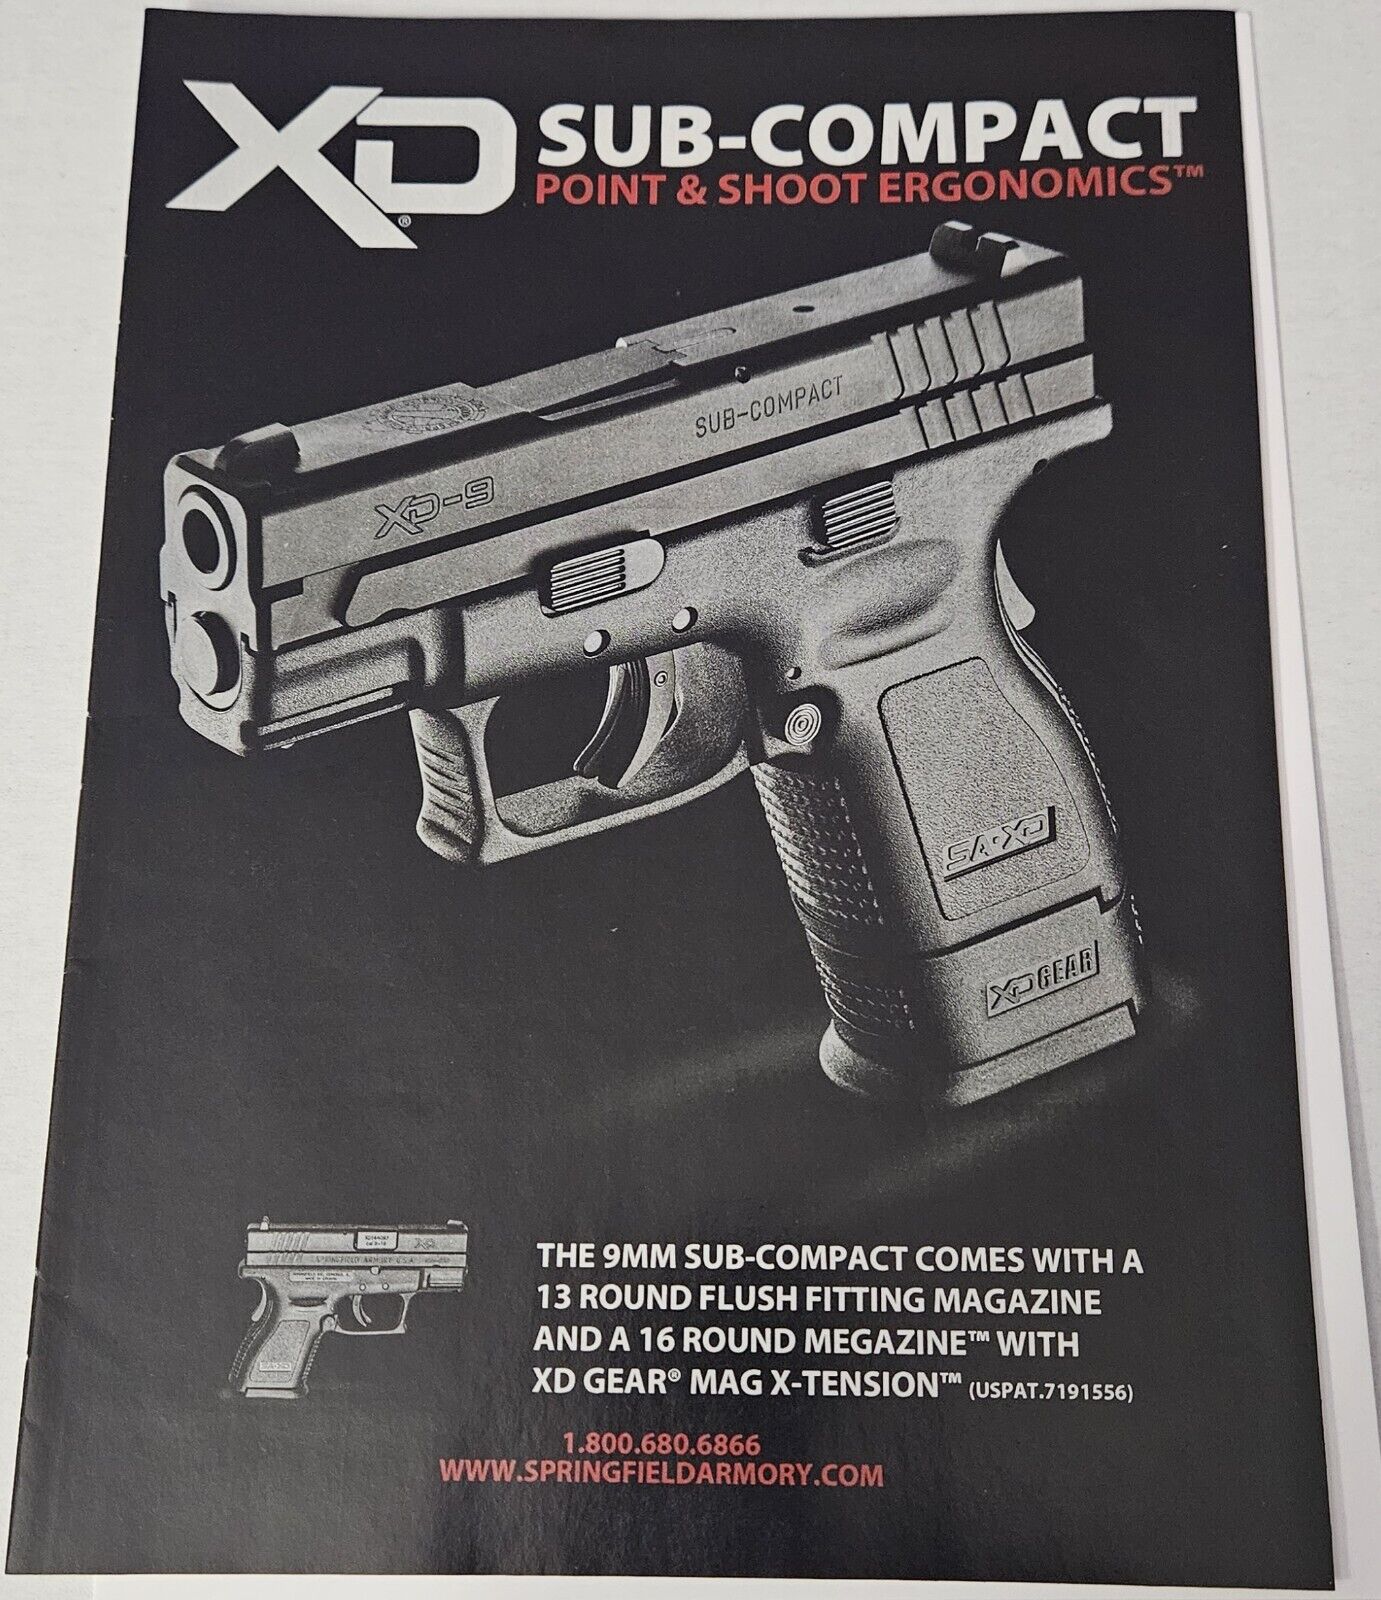 2010 Print Ad of Springfield Armory XD-9 Sub-Compact Pistol